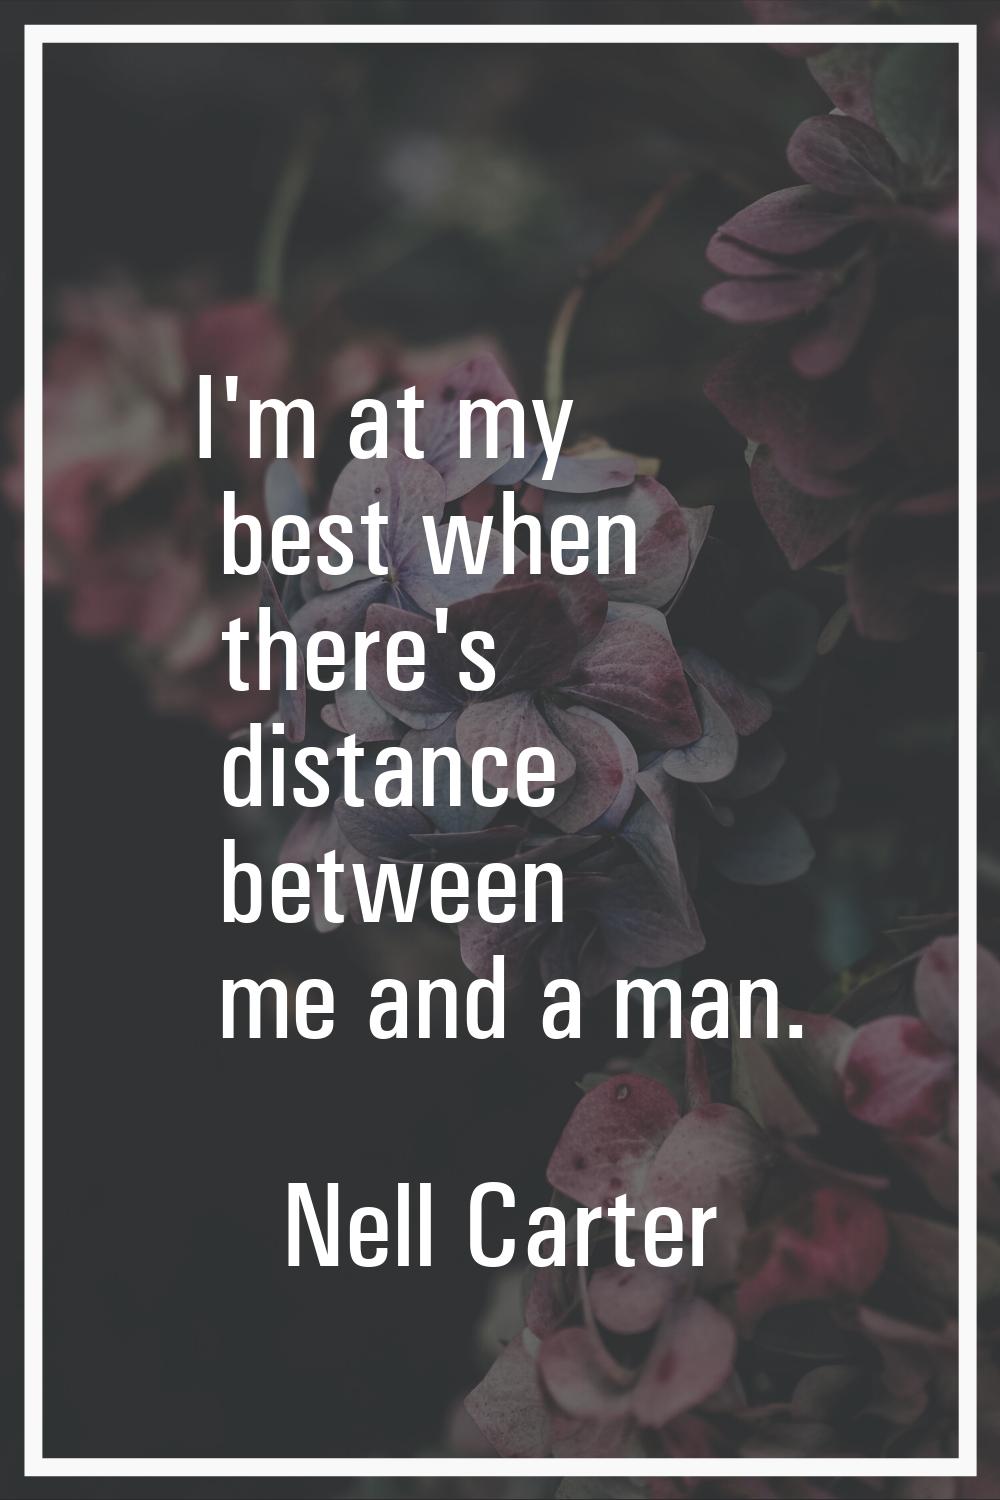 I'm at my best when there's distance between me and a man.